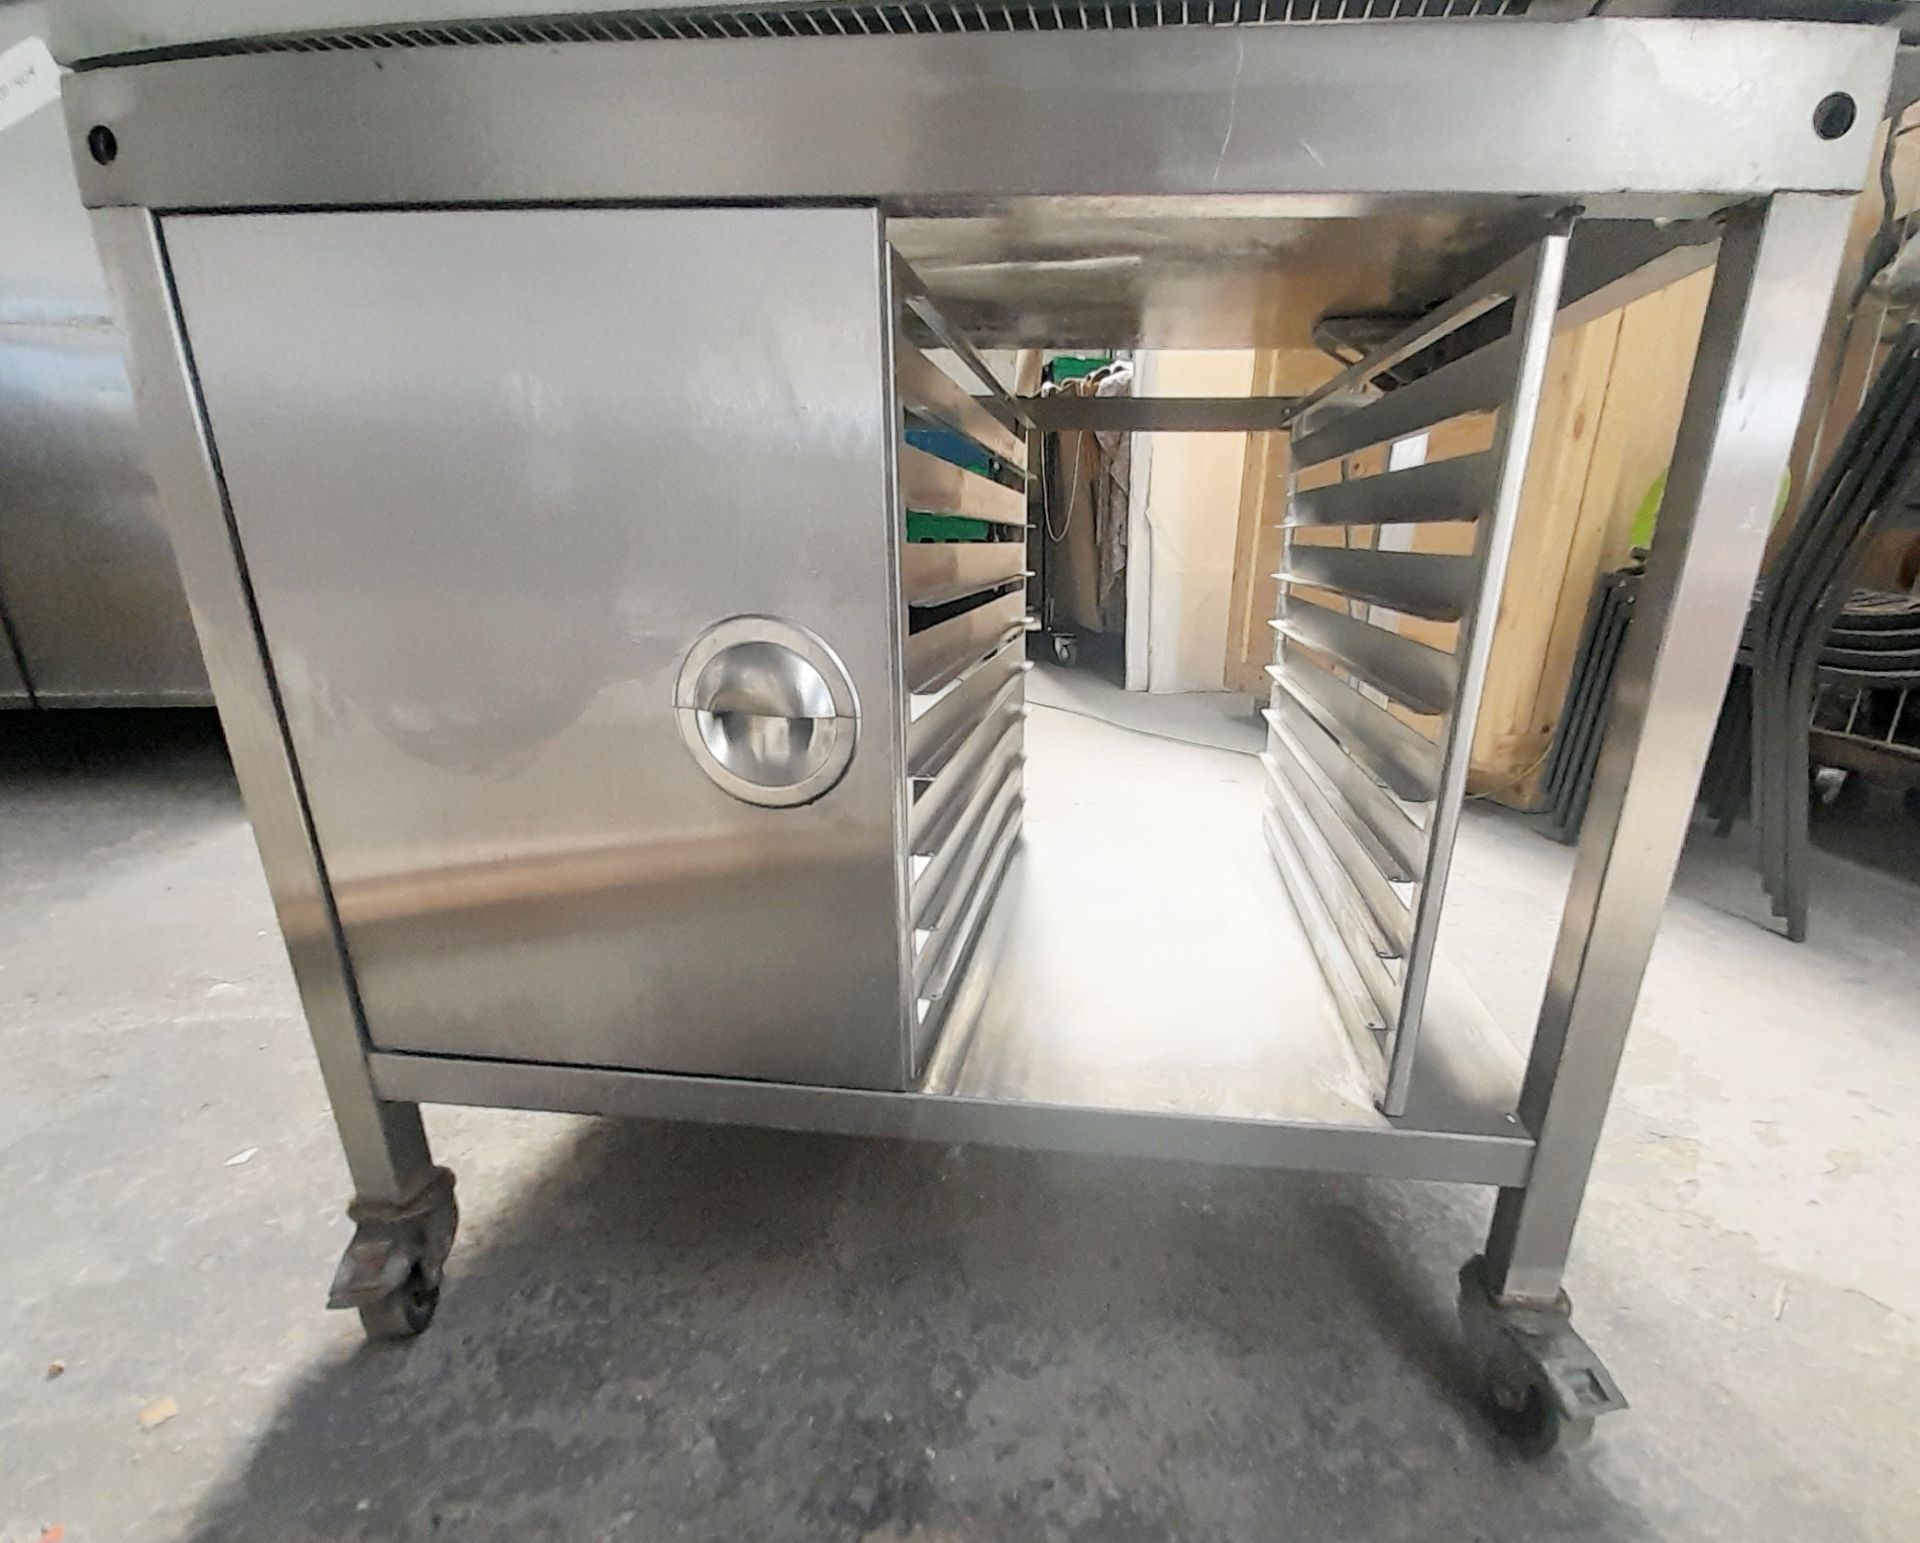 1 x Mono BX Bakery Oven With Stand - 3 Phase Power - Image 4 of 8